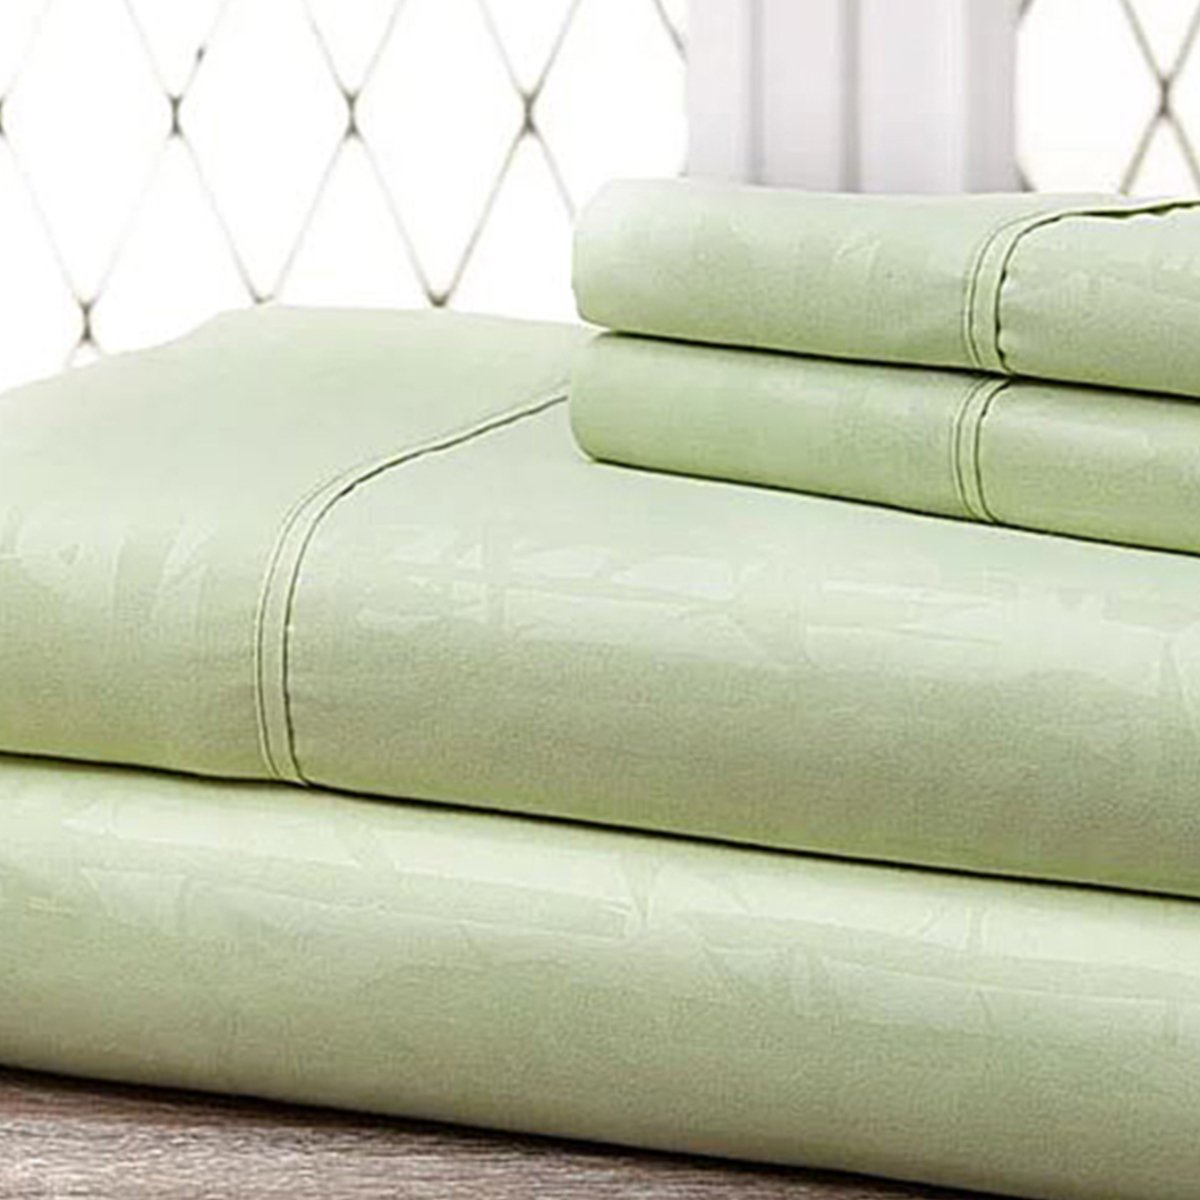 Hny-4pc-eb-sag-q Super-soft 1600 Series Bamboo Embossed Bed Sheet, Sage - Queen, 4 Piece